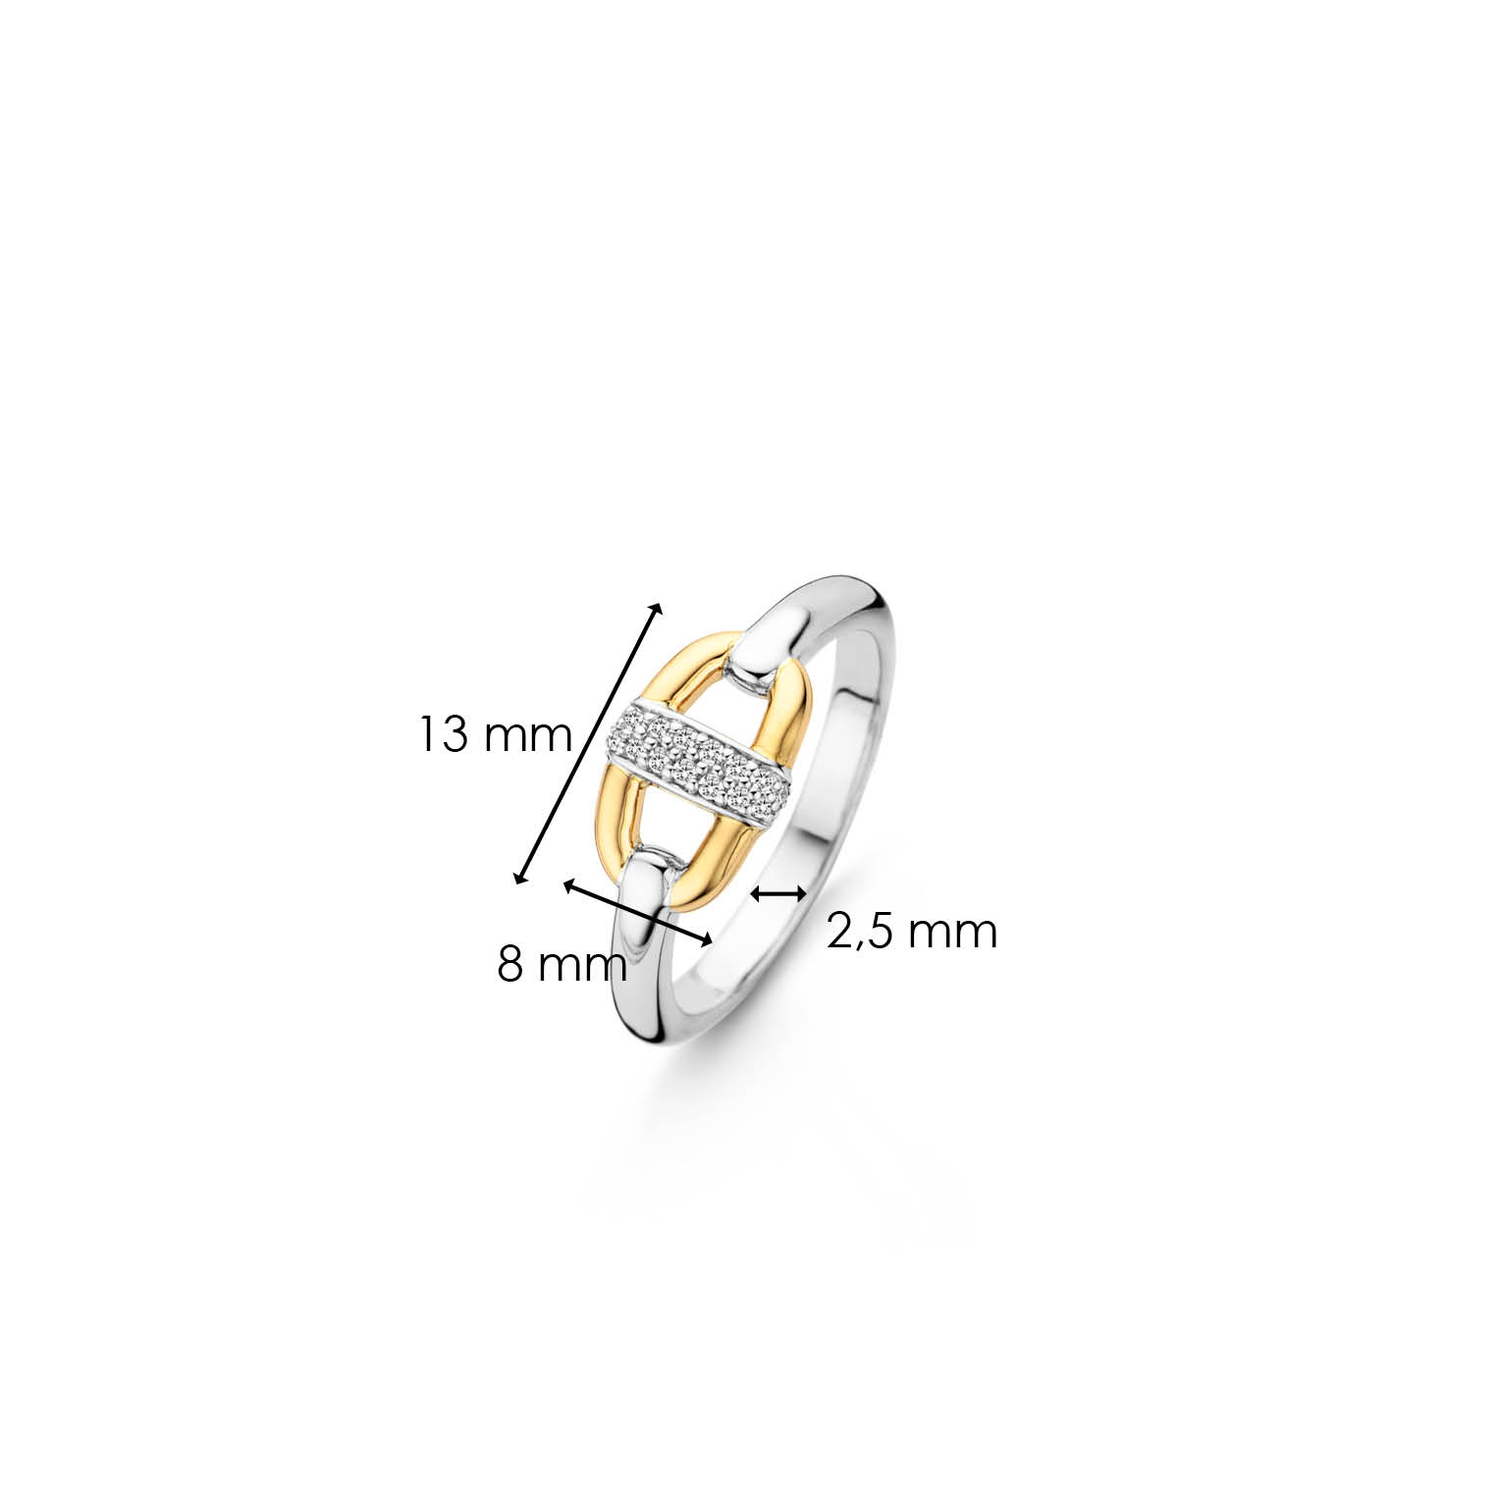 LINK TWO-TONED RING | Ti Sento Milano | Luby 